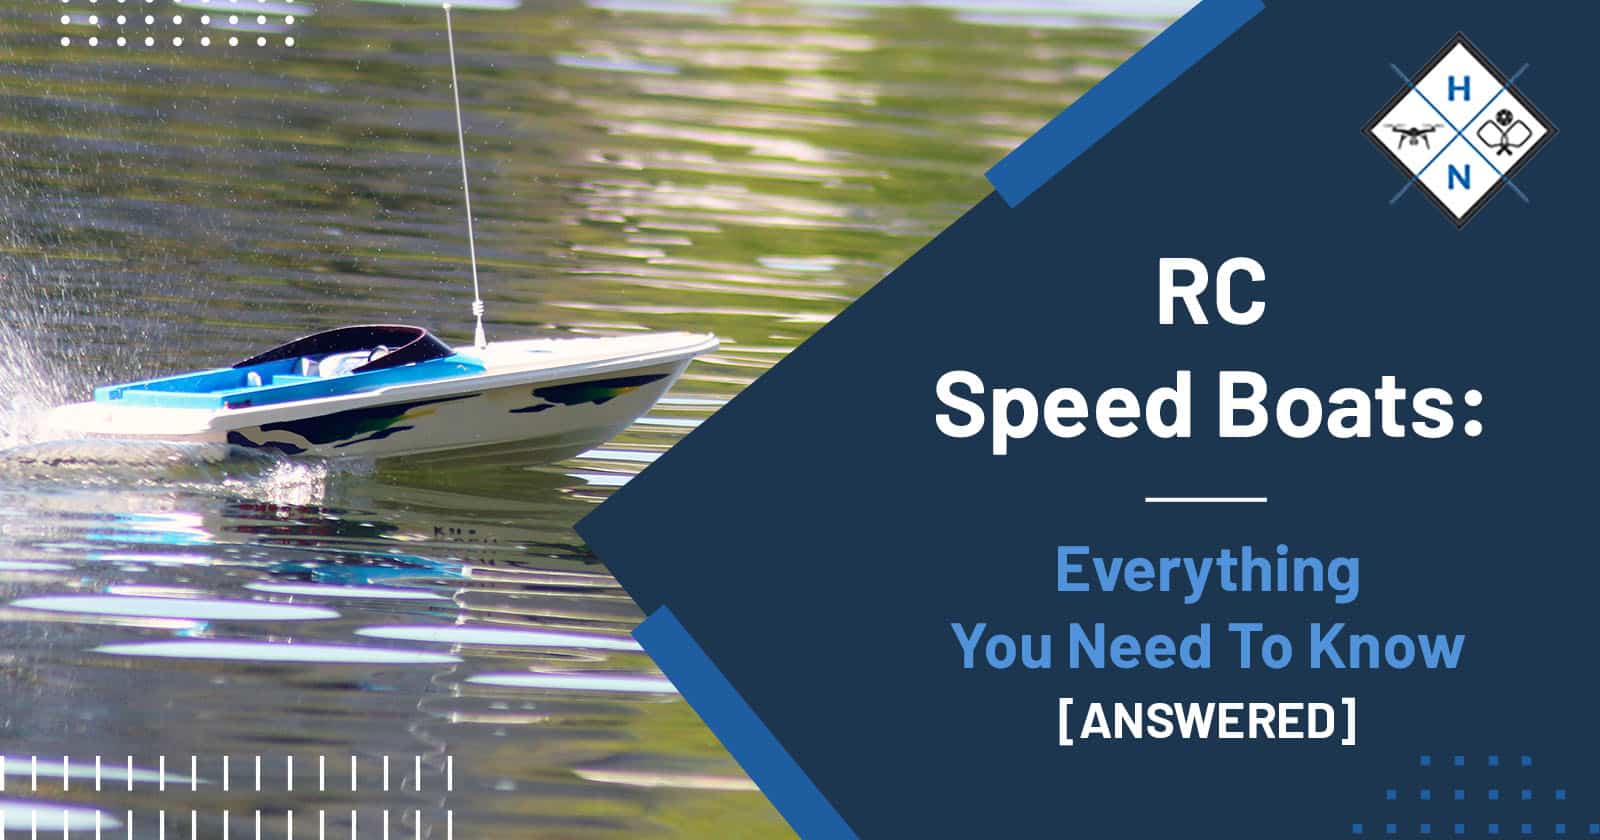 RC Speed Boats: Everything You Need To Know